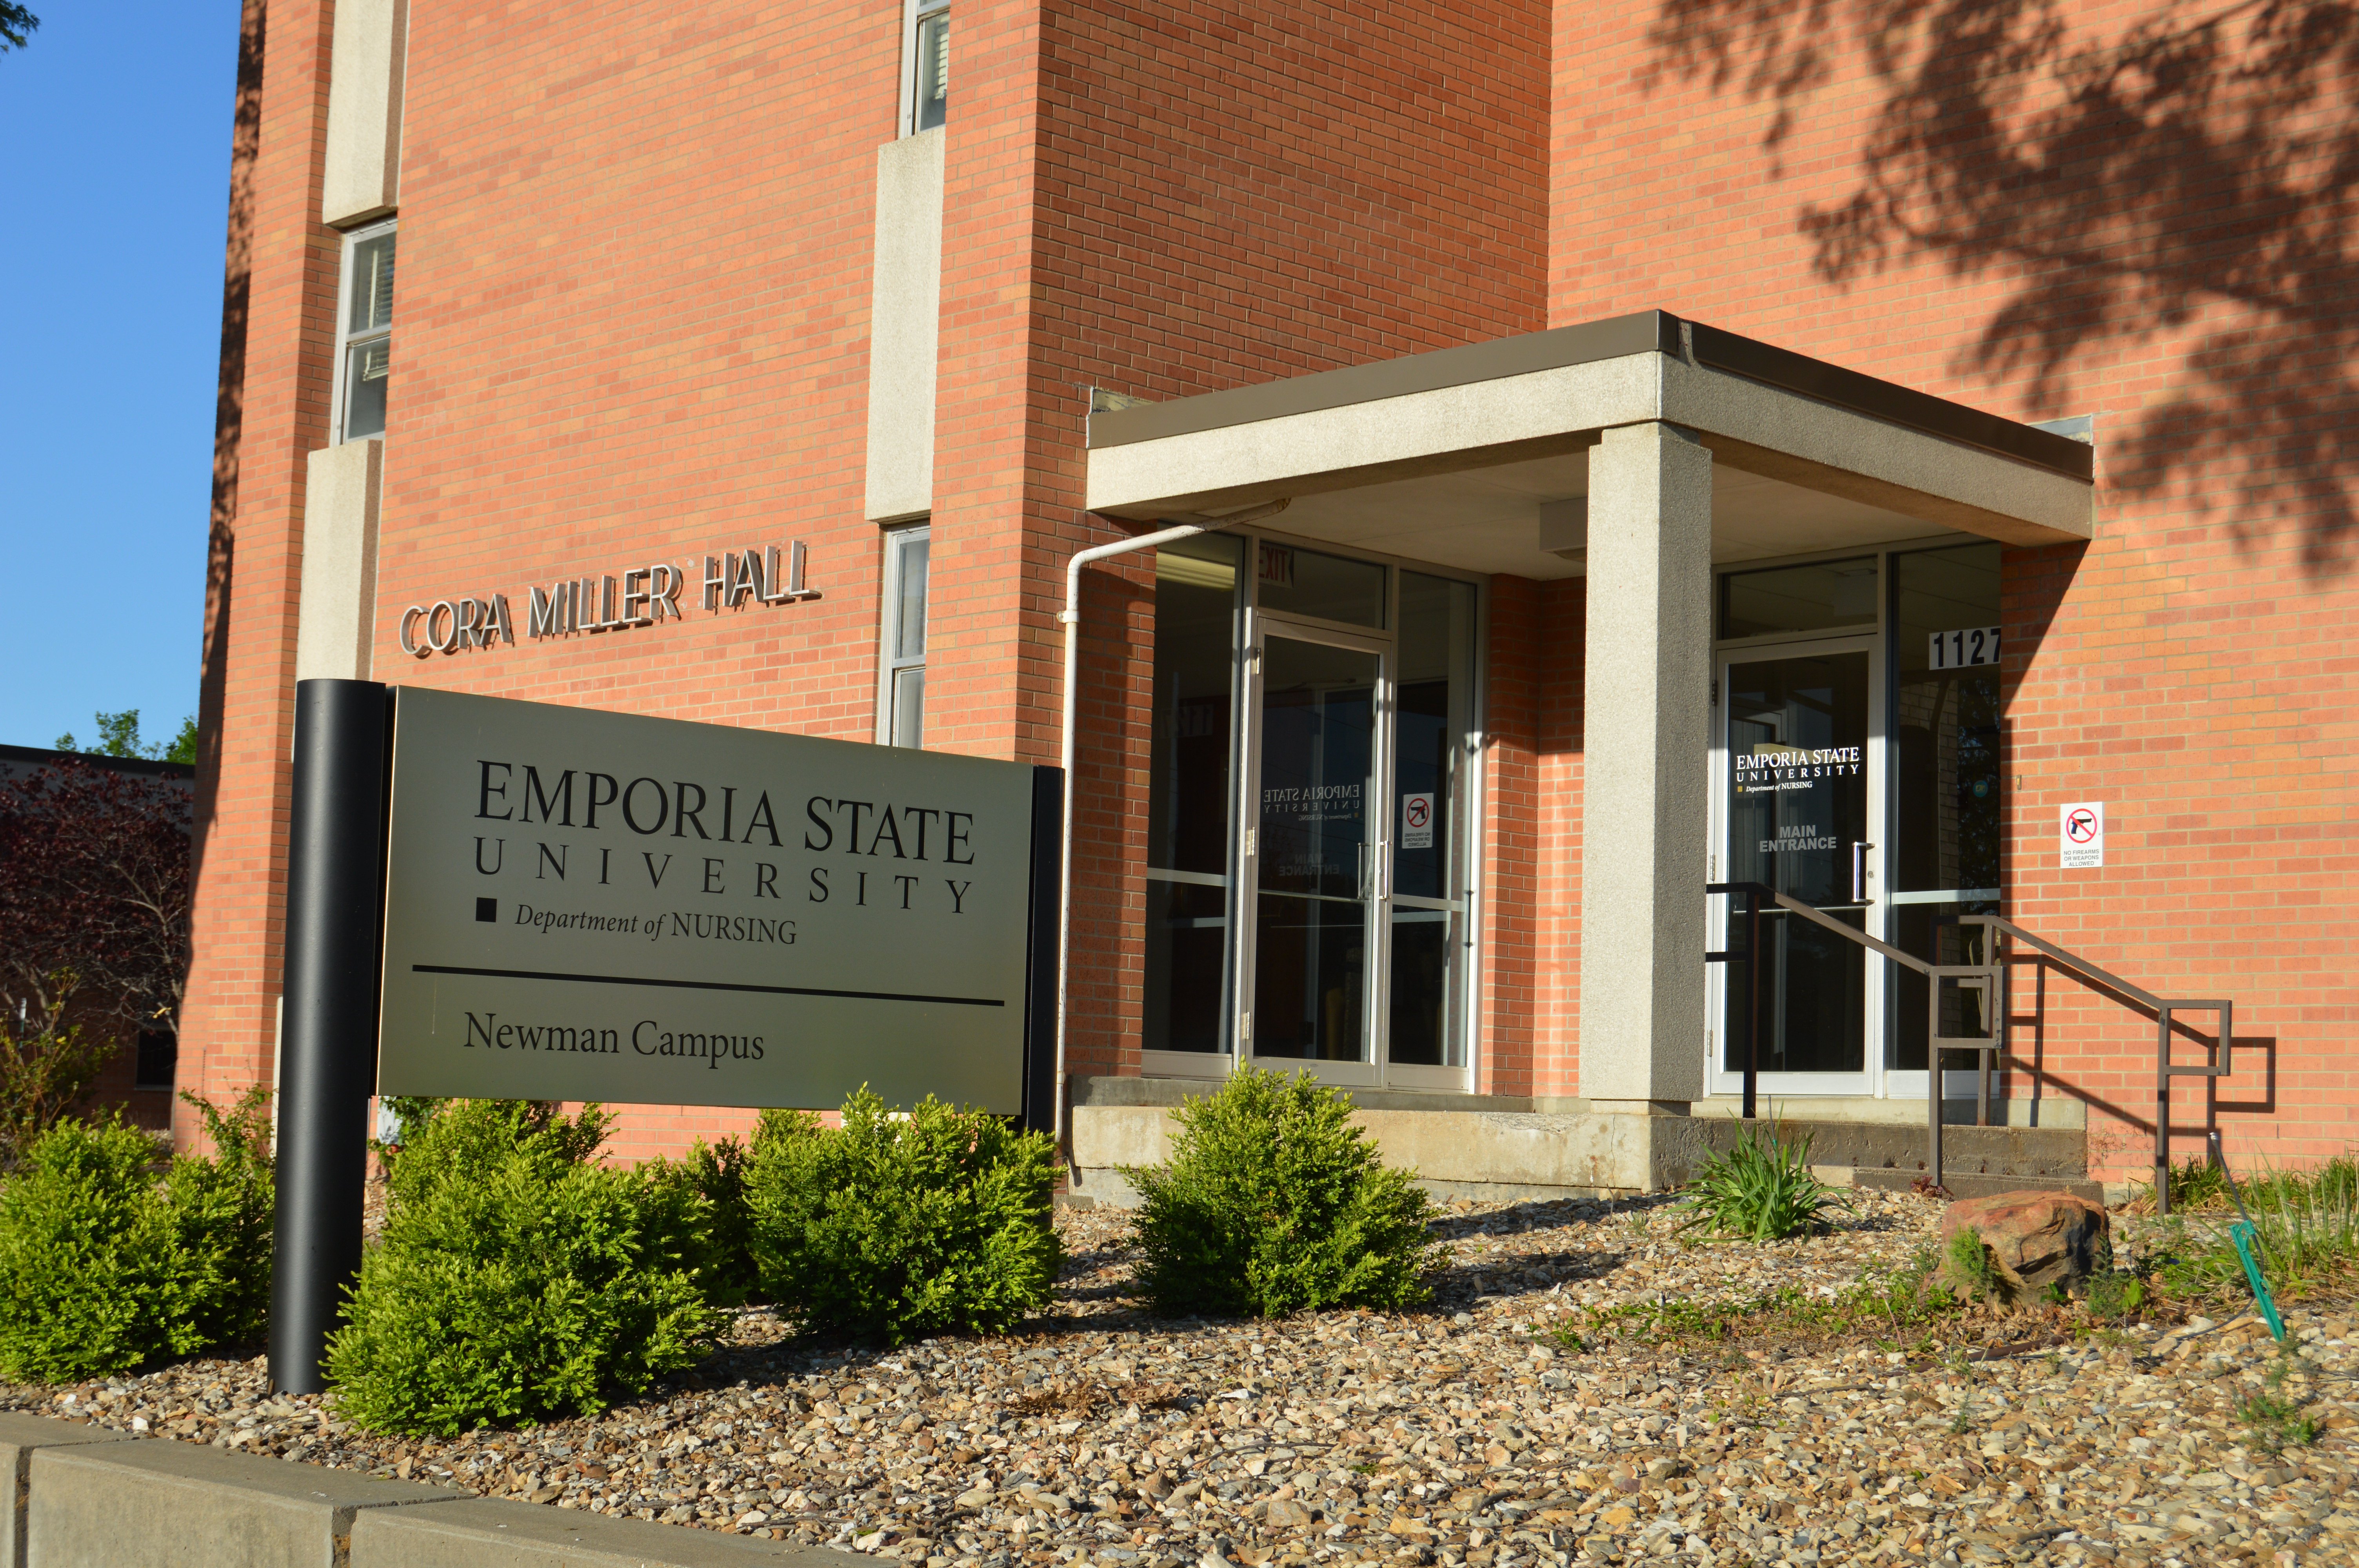 Exterior of Emporia State Cora Miller Hall, home of the Department of Nursing